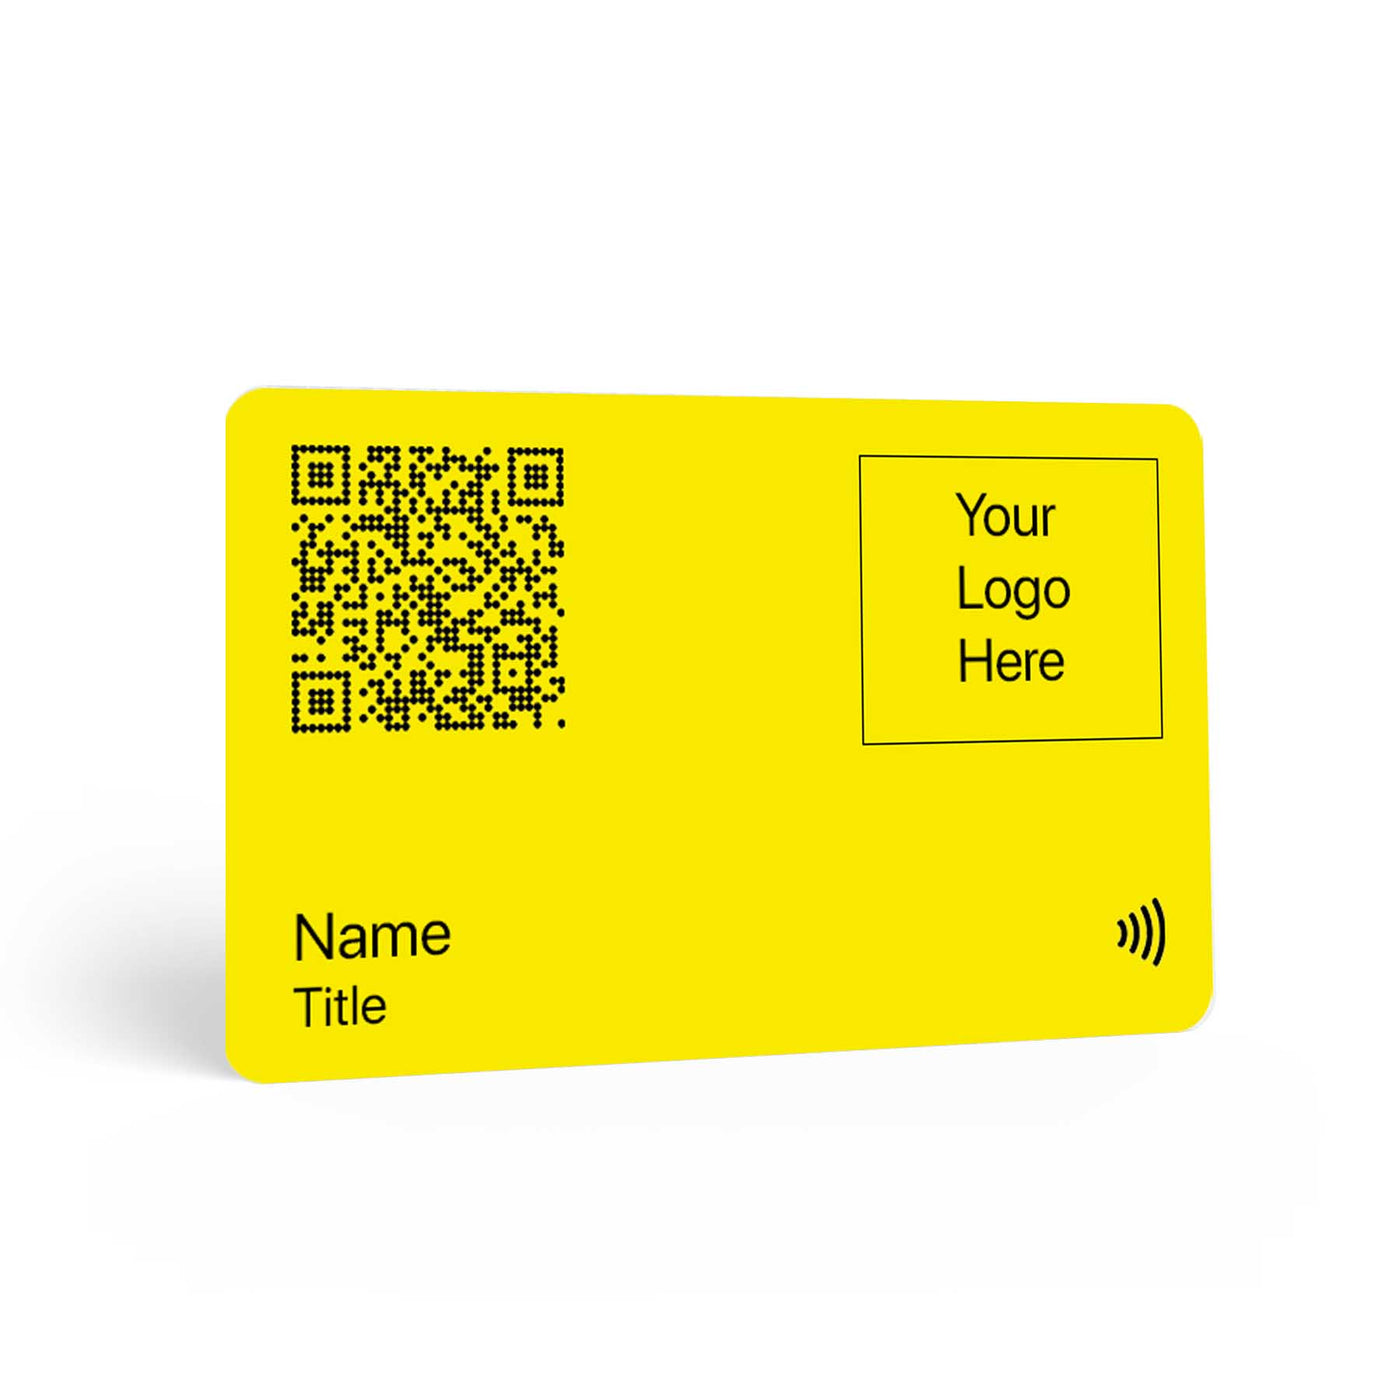 TAPiTAG Yellow PVC NFC-Enabled Digital Business Card